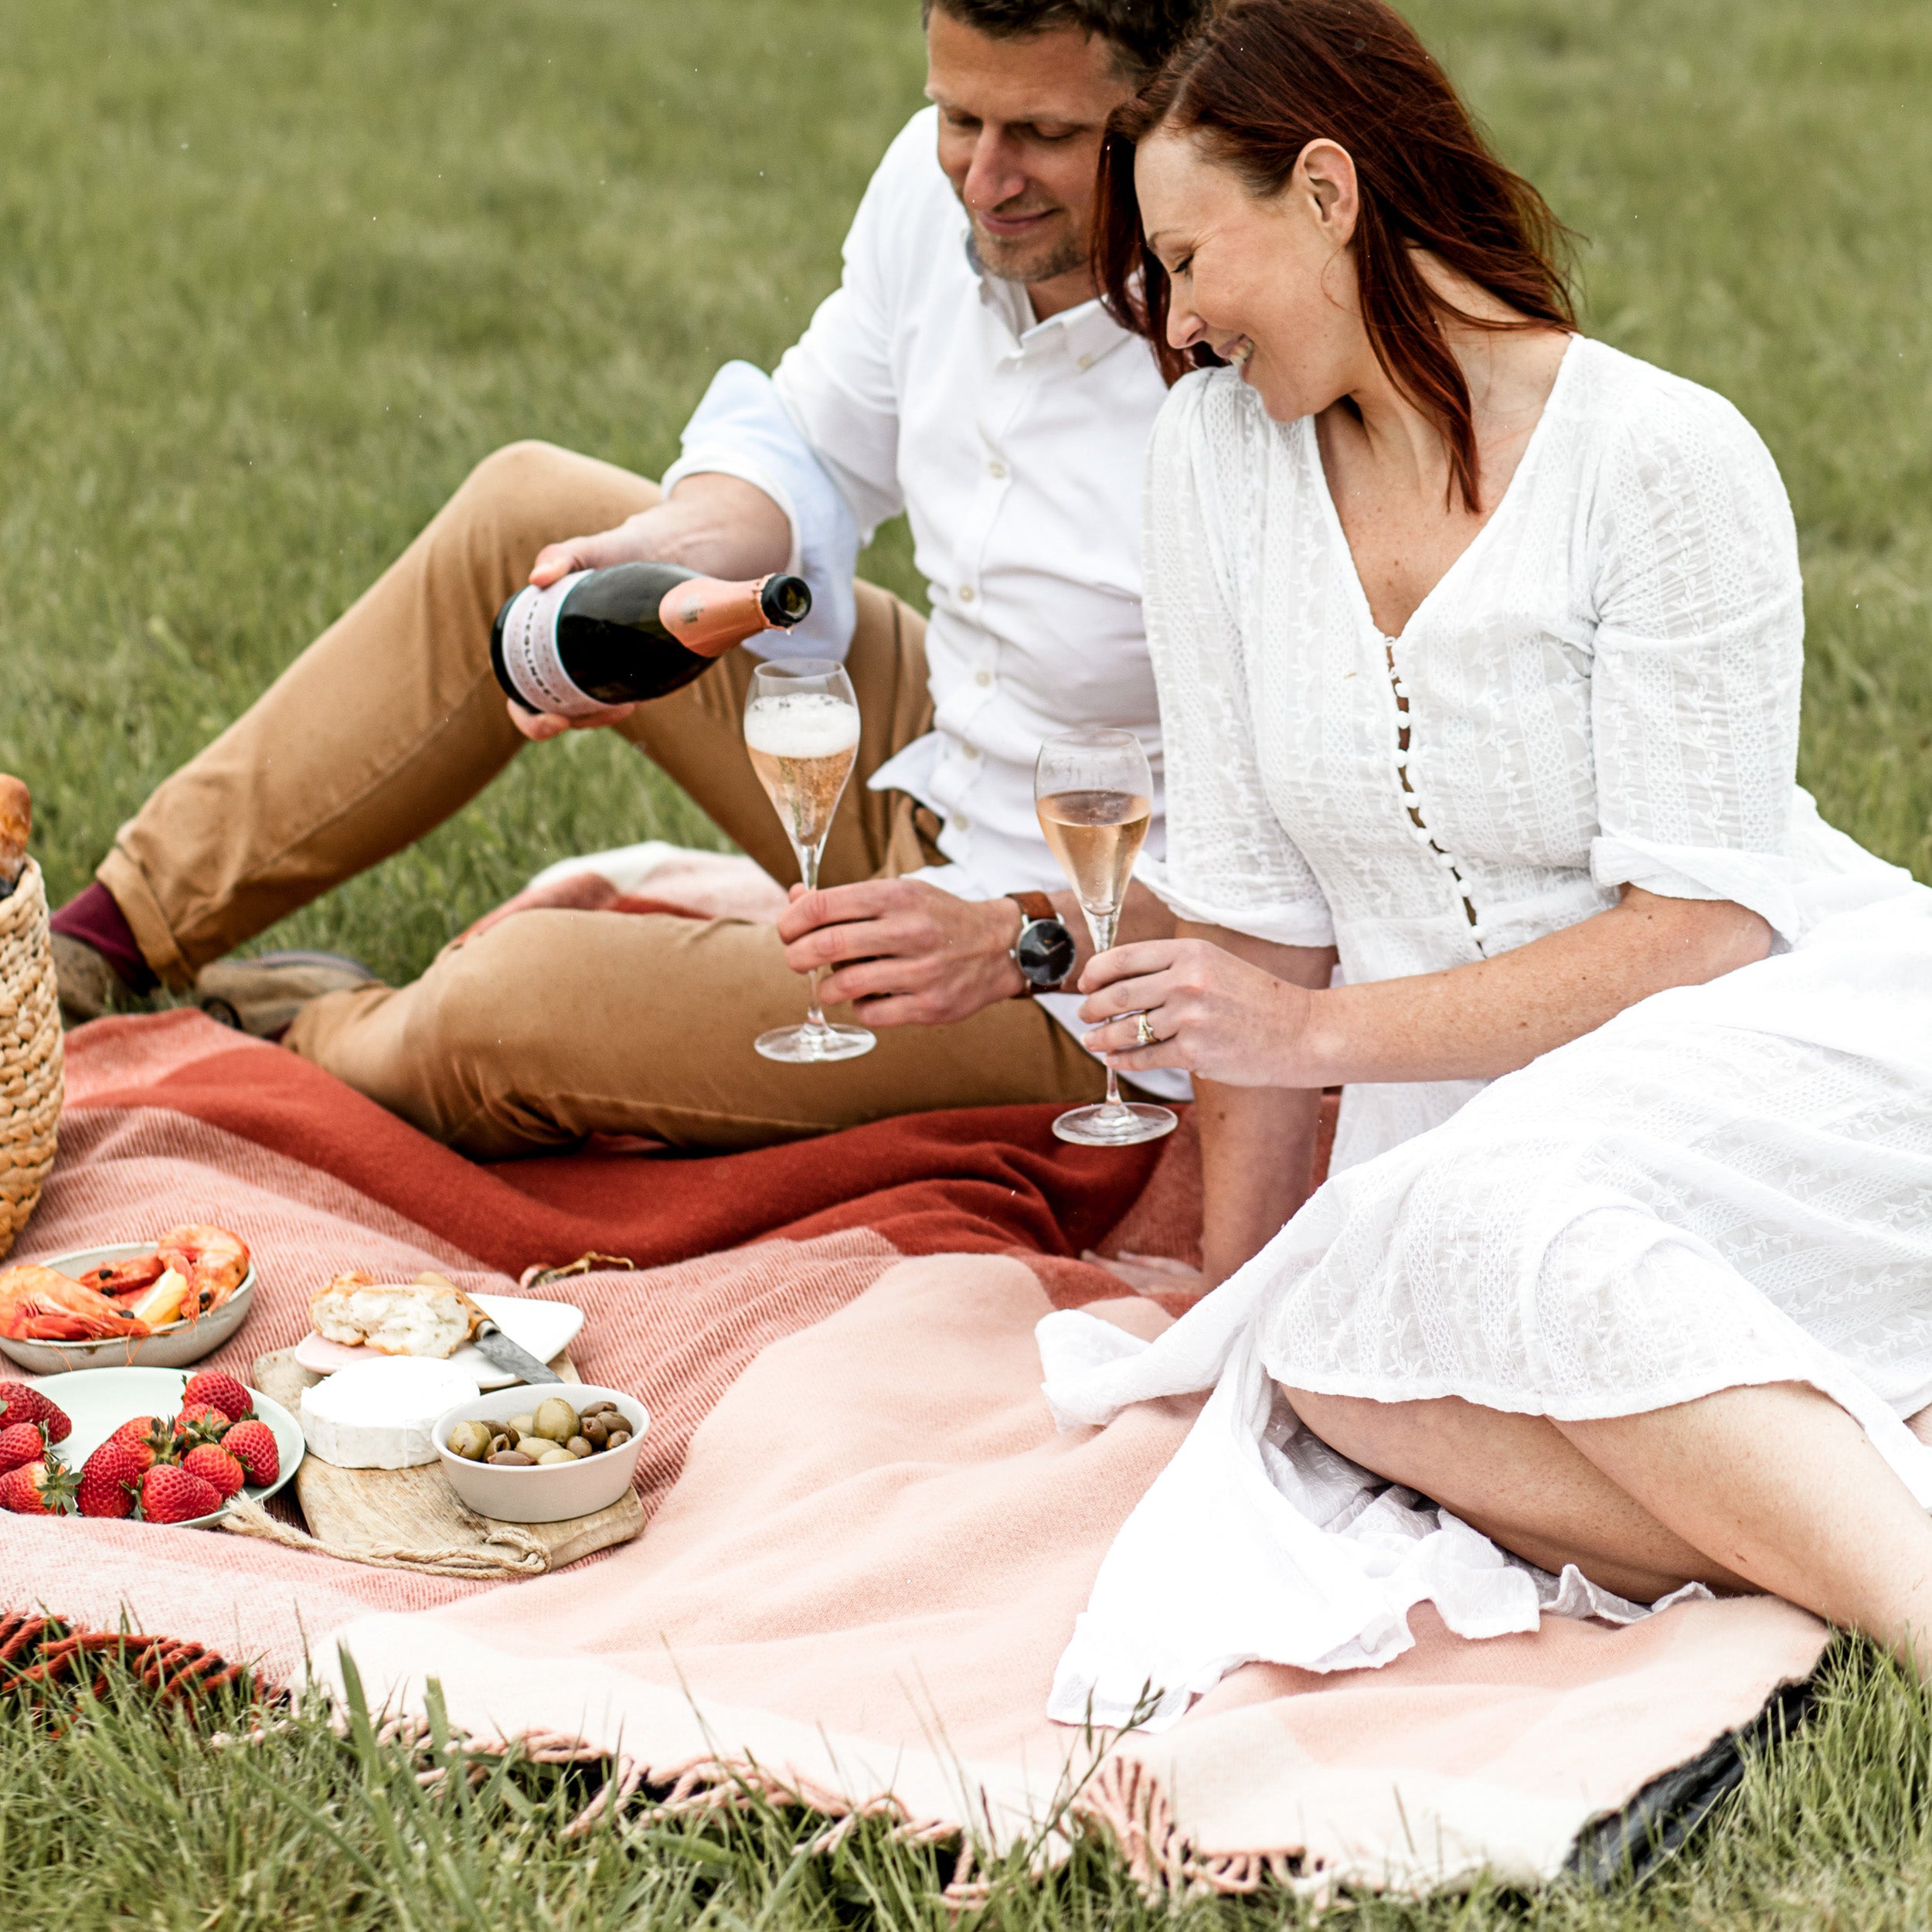 A couple picnicking on the grass, using a graze picnic rug in pink.